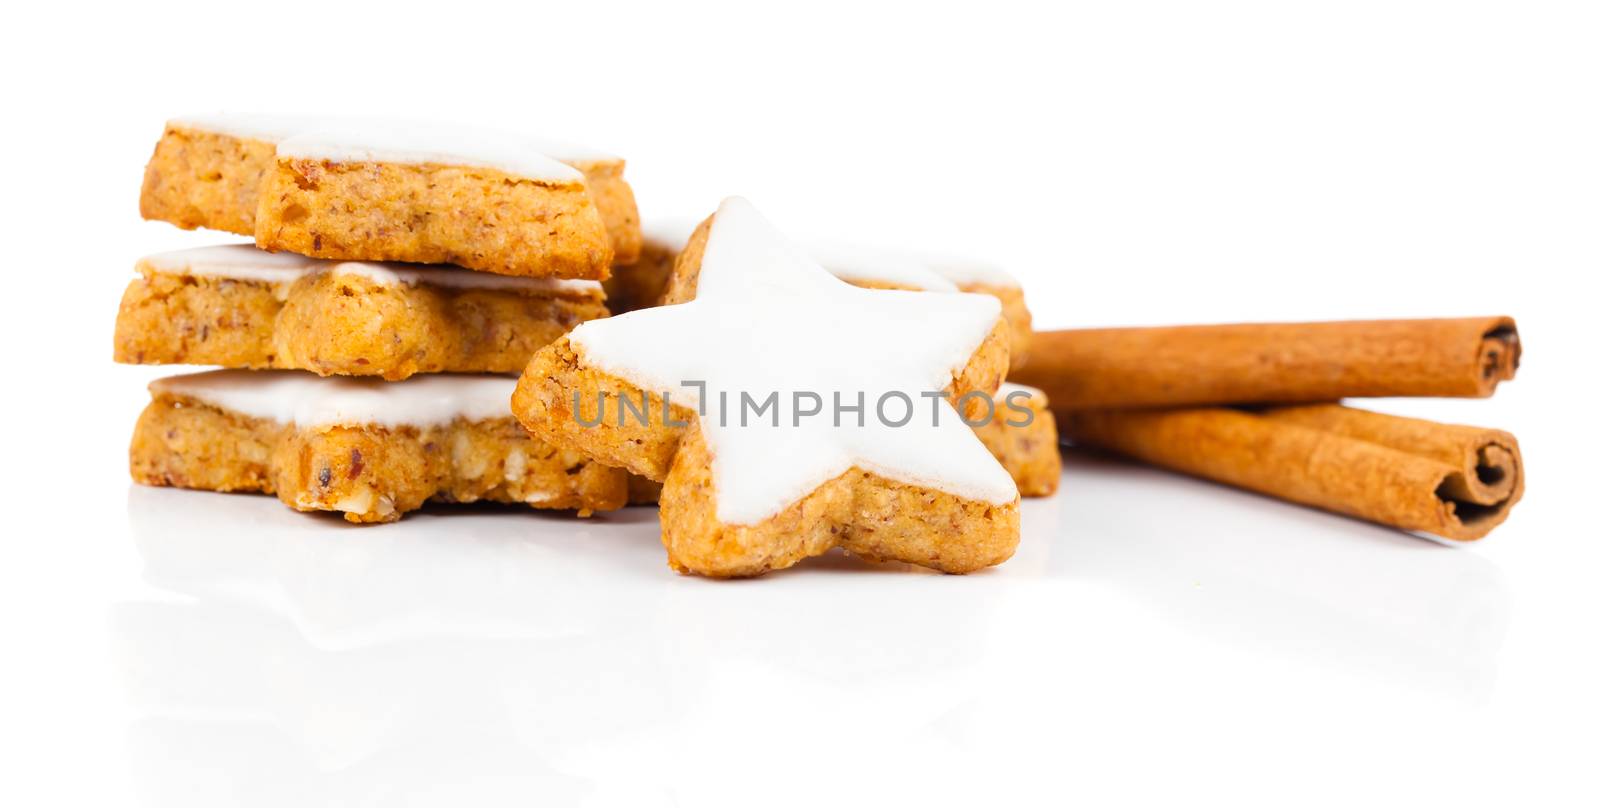 star shaped cinnamon biscuit and cinnamon sticks on white background